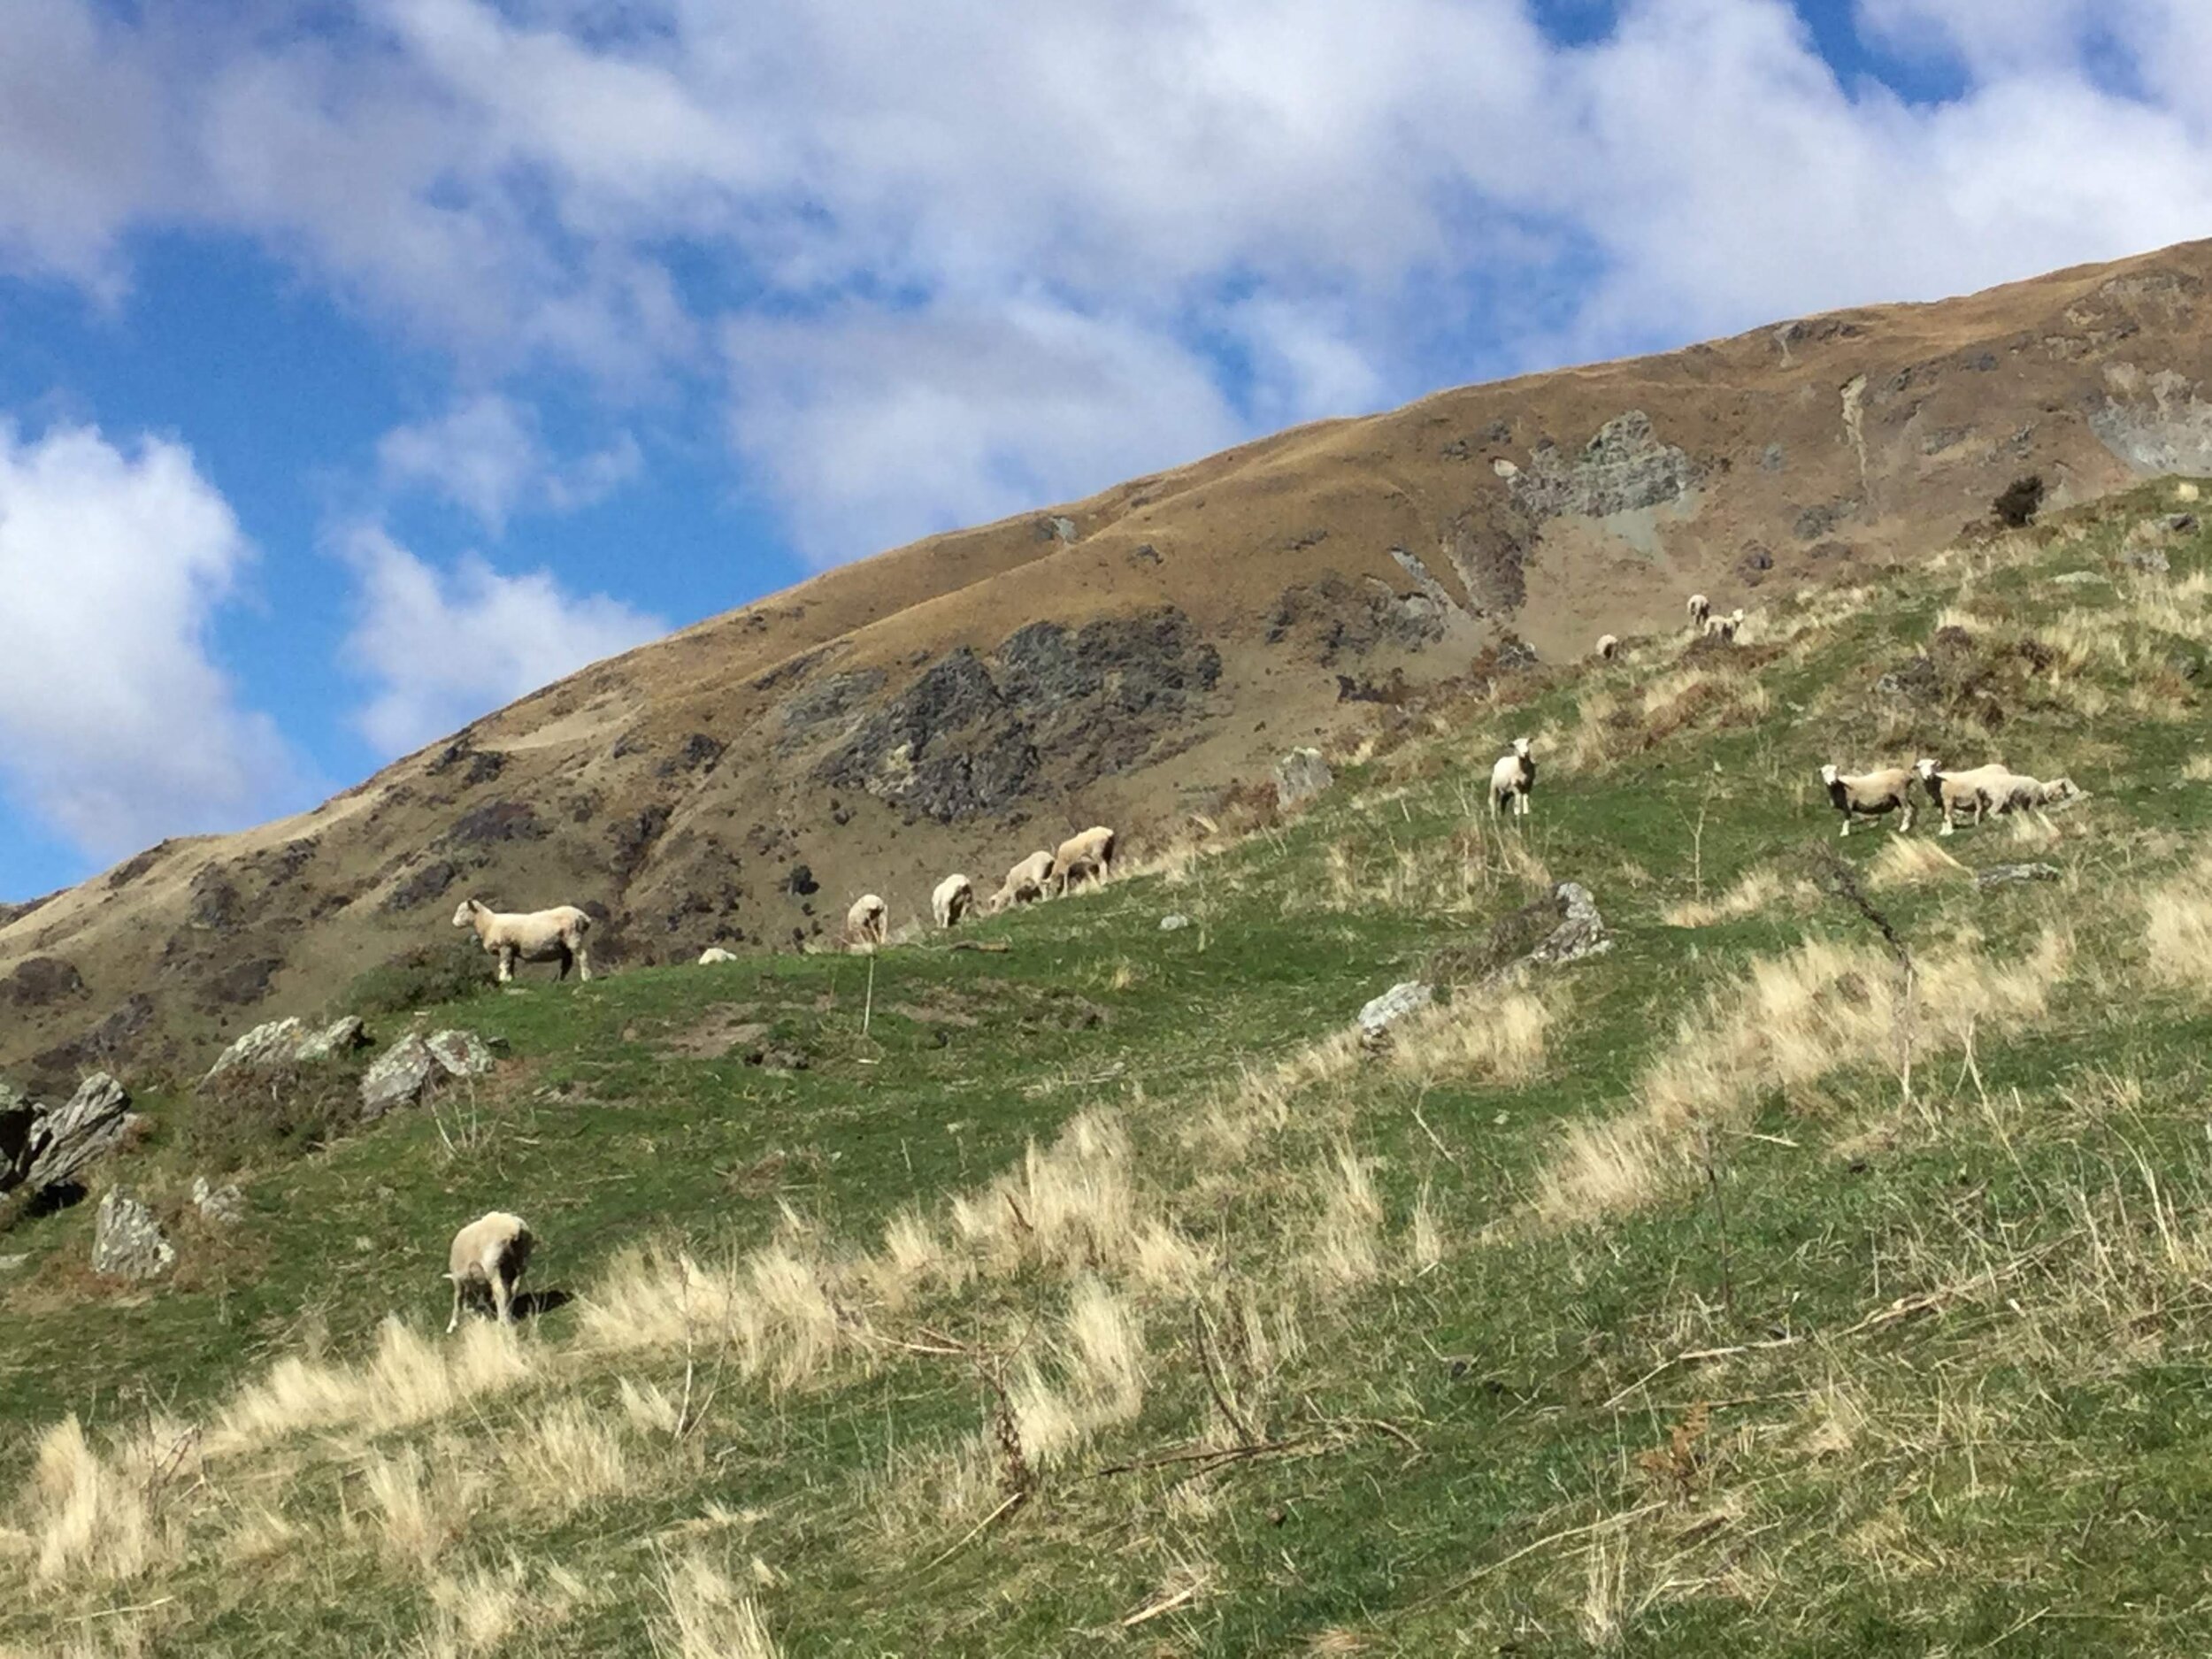 Sheep on the Lower Slopes of Roy's Peak